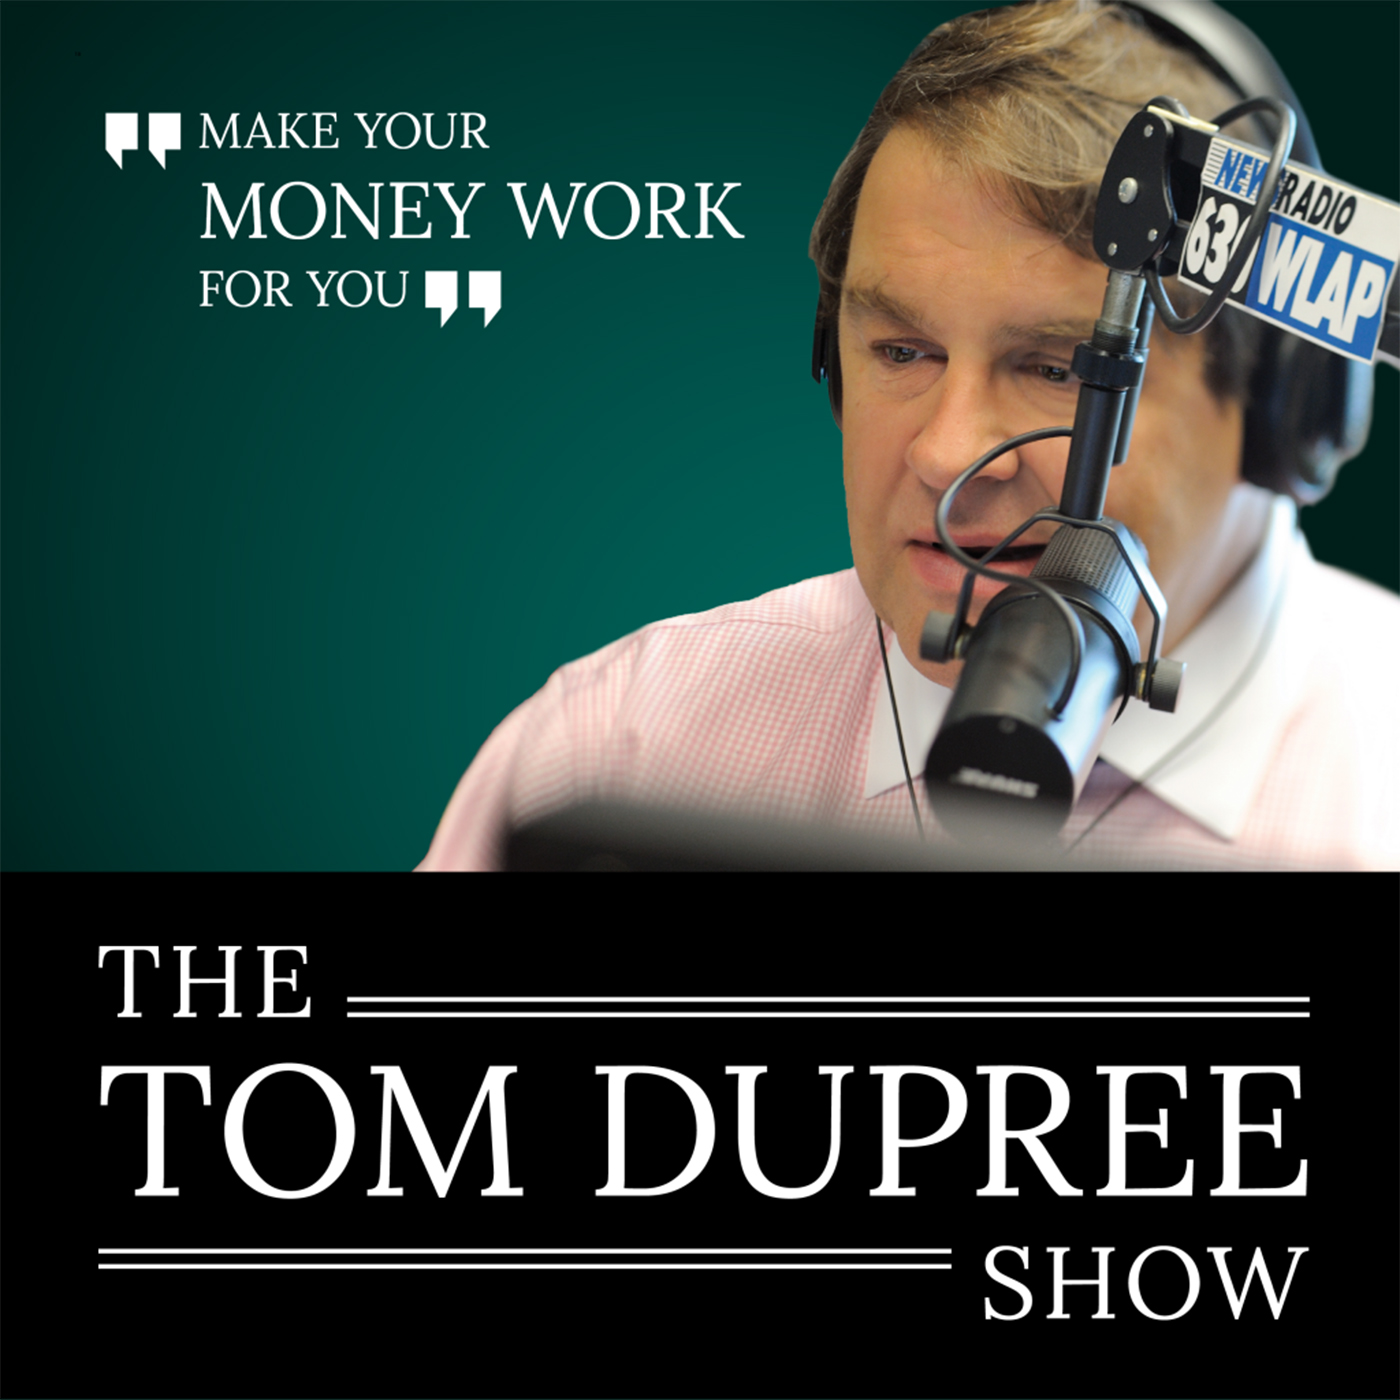 A highlight from The Tom Dupree Show. HOUR2 (Season 12 Episode 73)